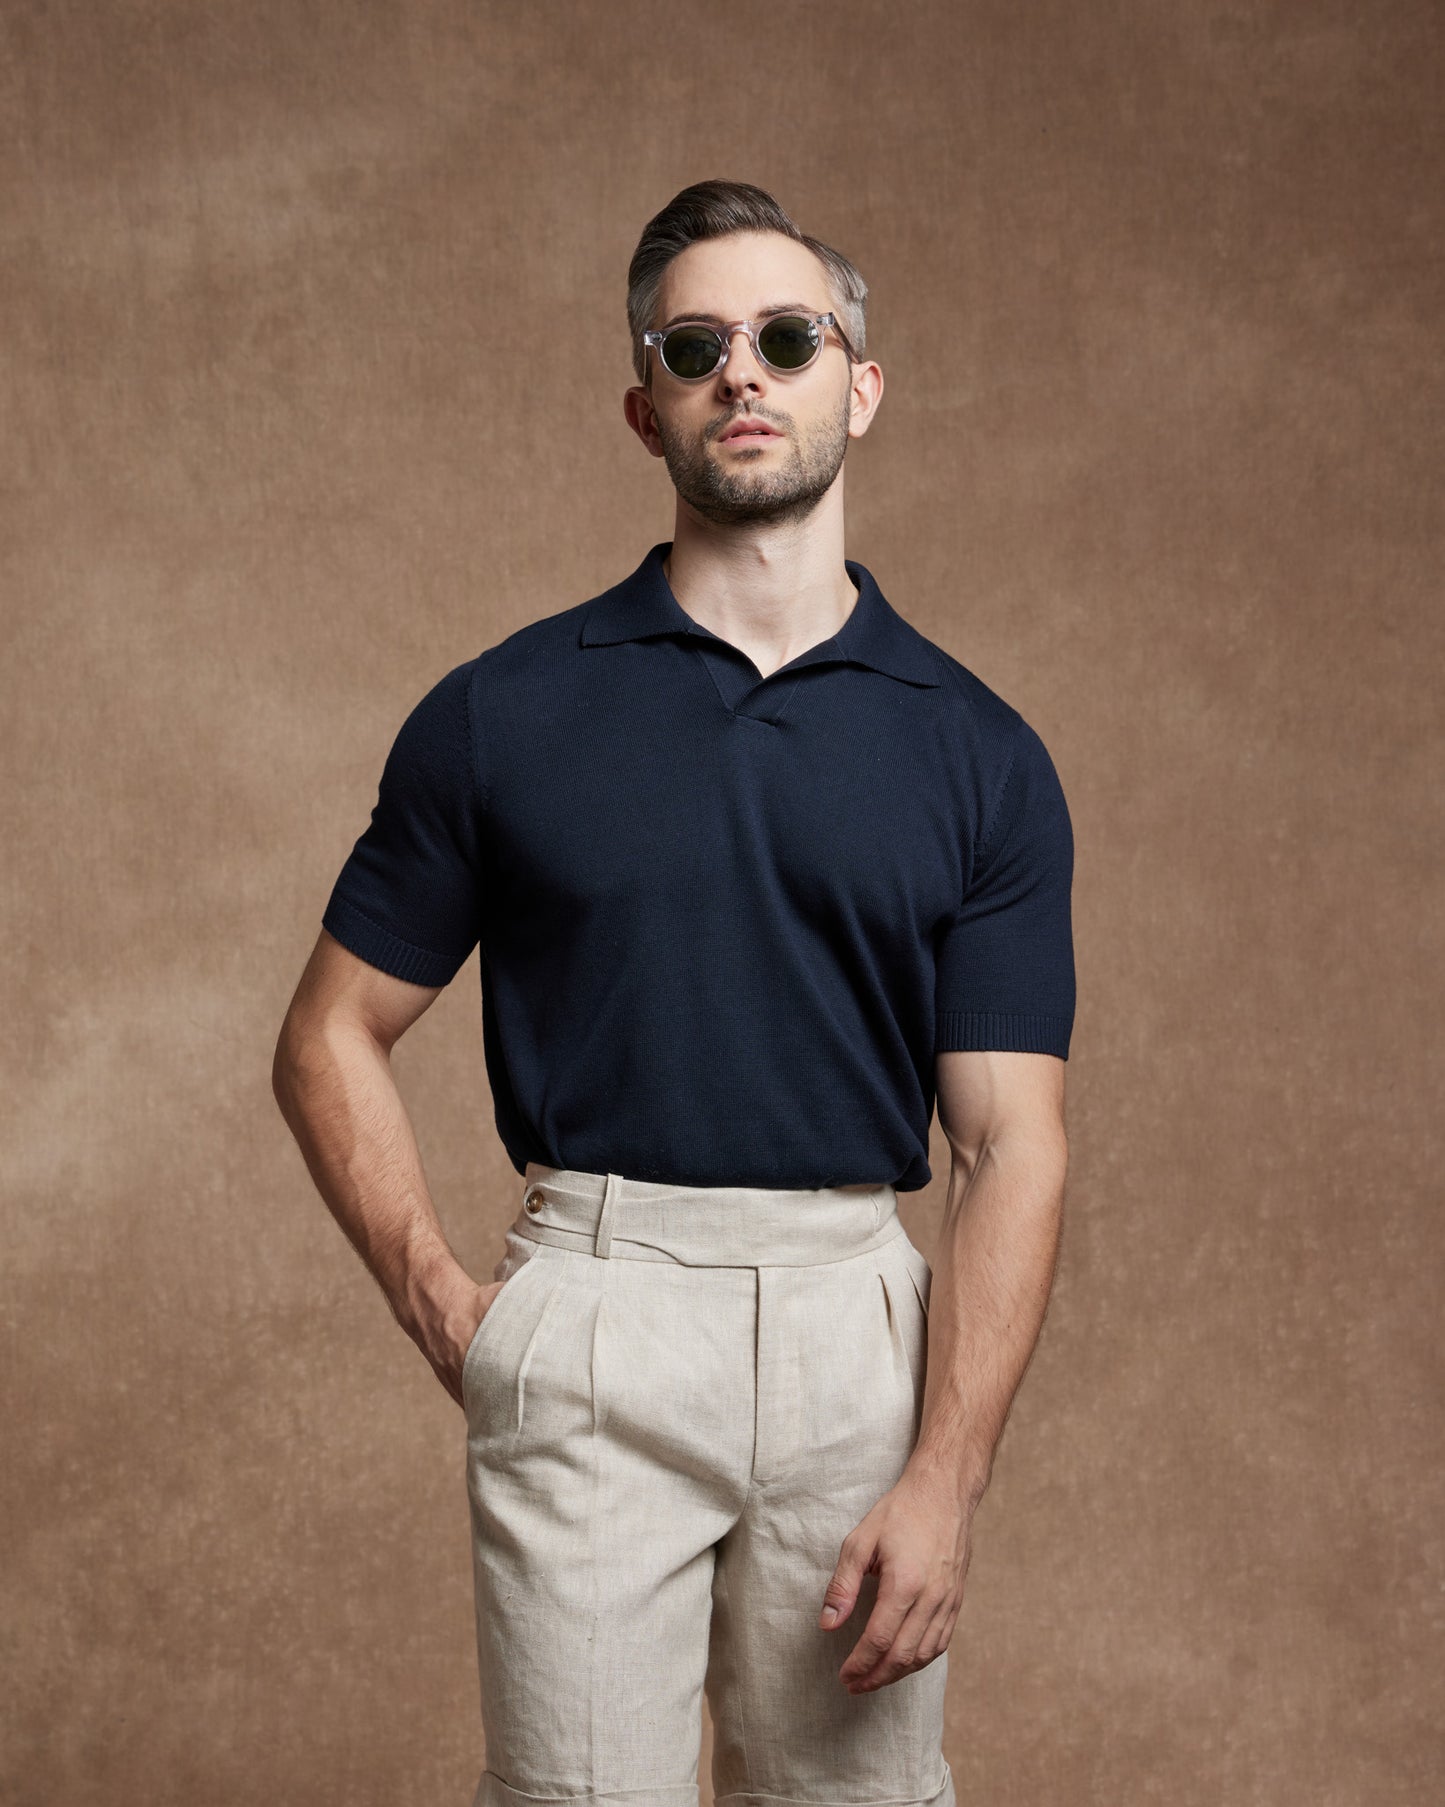 Knitted Polo Shirt - Navy